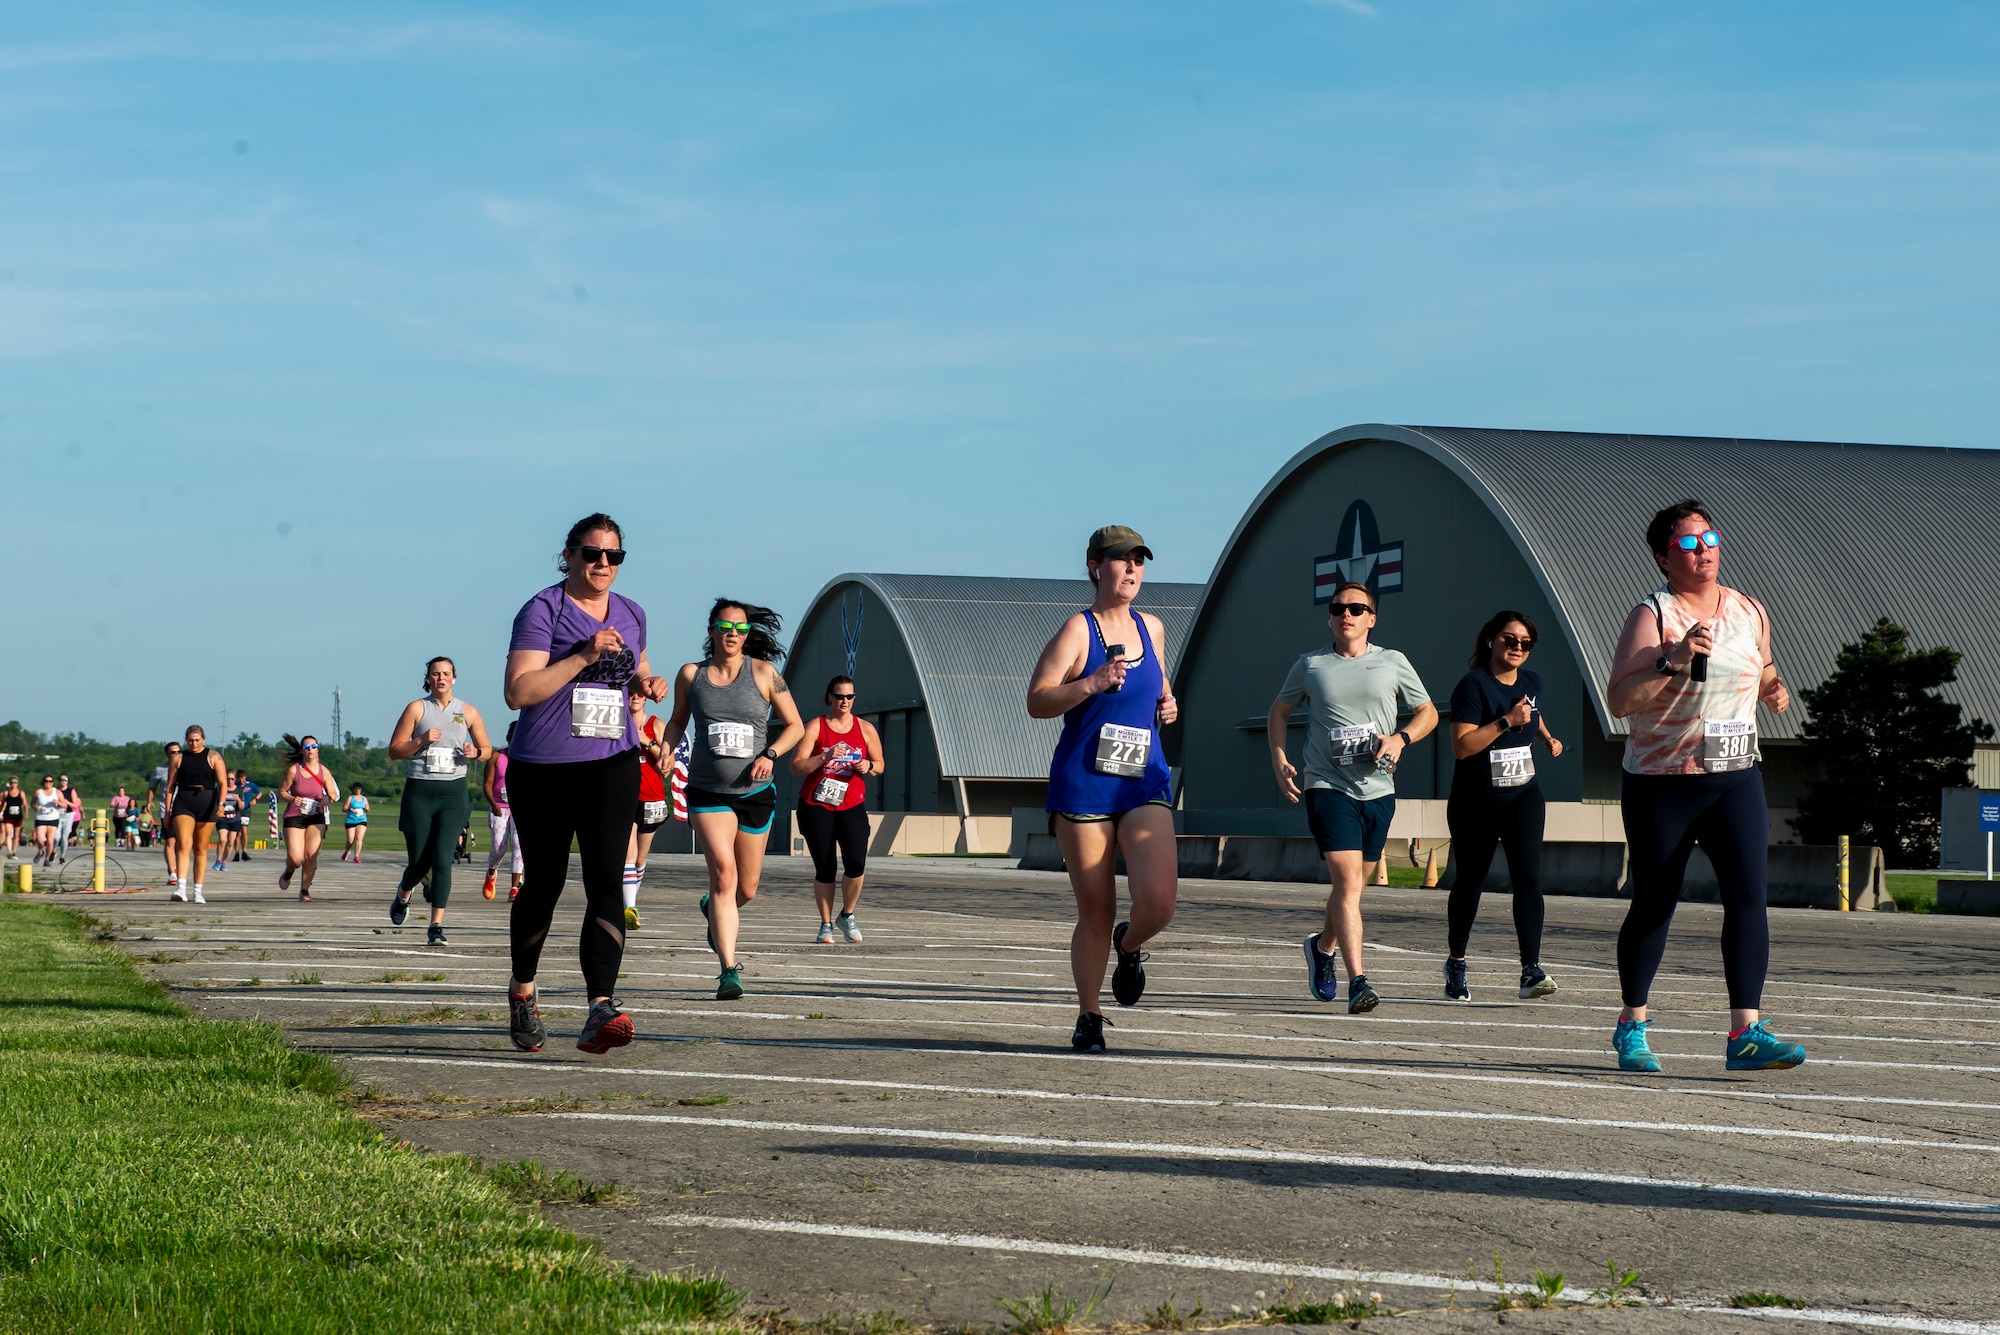 Museum Mile participants run past the second hangar at the National Museum of the United States Air Force, May 11, 2023. Nearly 400 participants ran the 1-mile family friendly course that wound through the museum grounds before finishing under the wingtips of historic aircrafts at the Air Park. (U.S. Air Force photo by A1C James Johnson.)